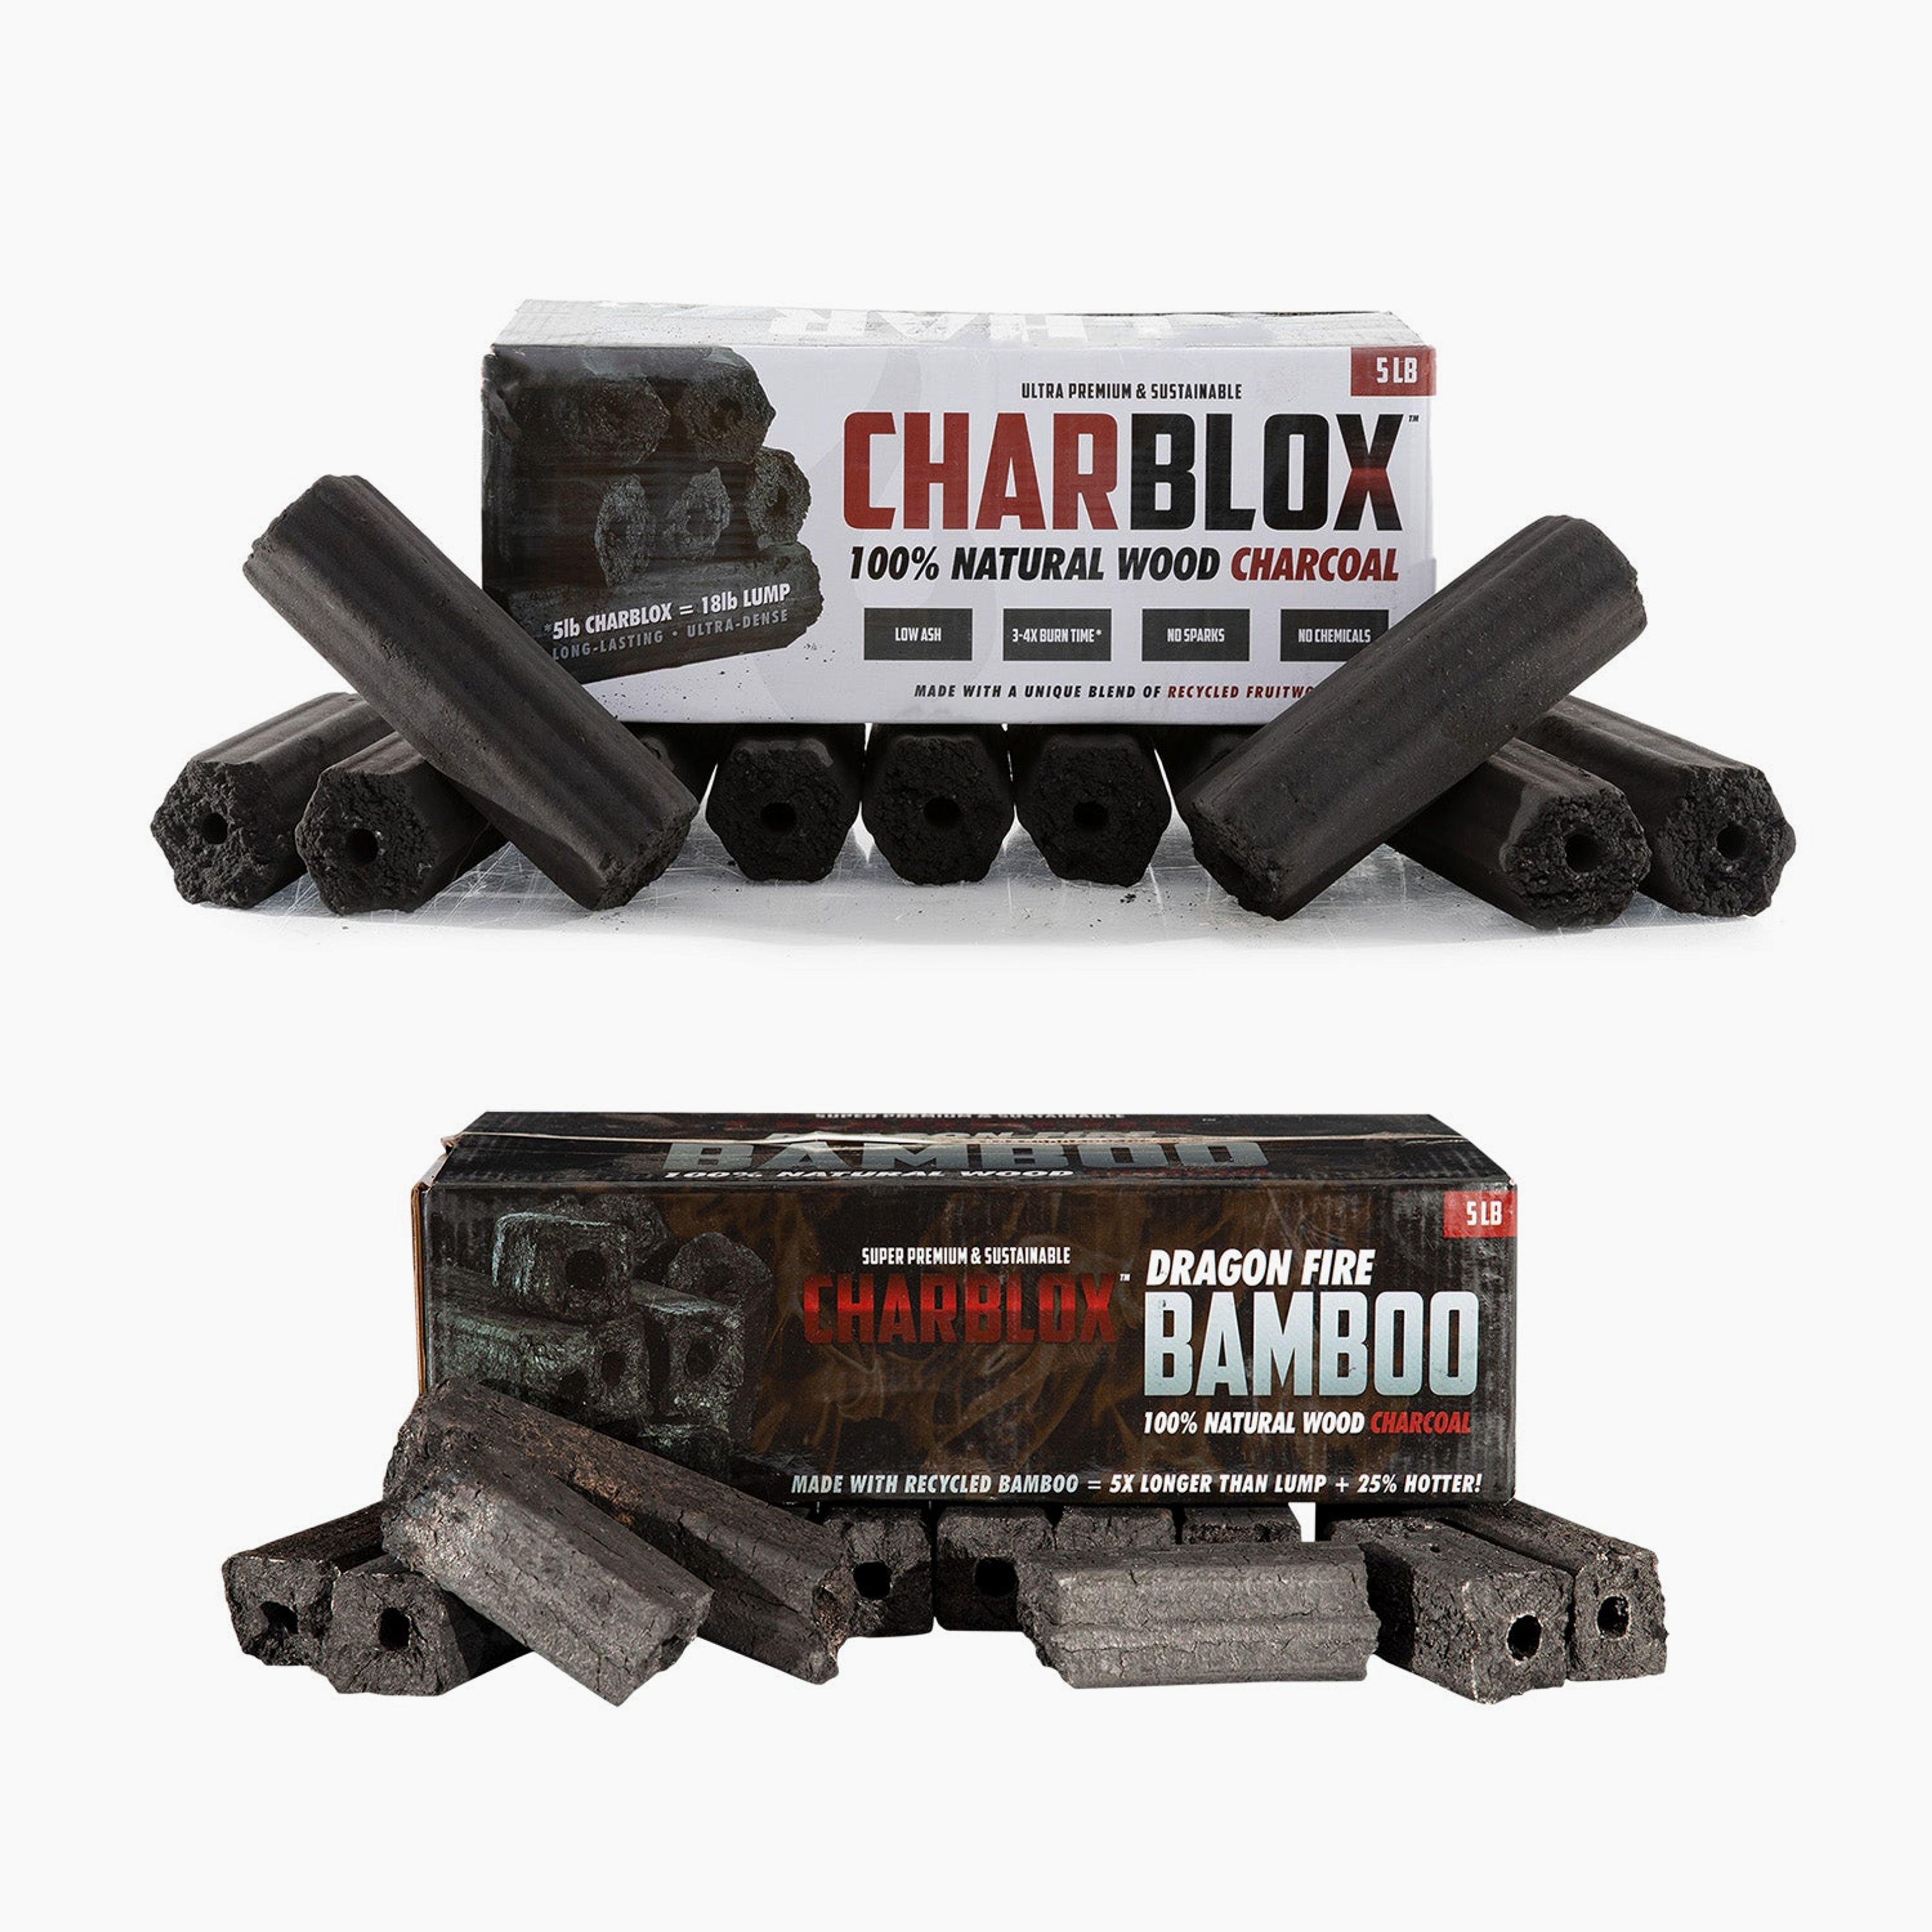 CHARBLOX Dual Pack Hardwood & Bamboo Ultra Premium Sustainable Grilling Charcoal